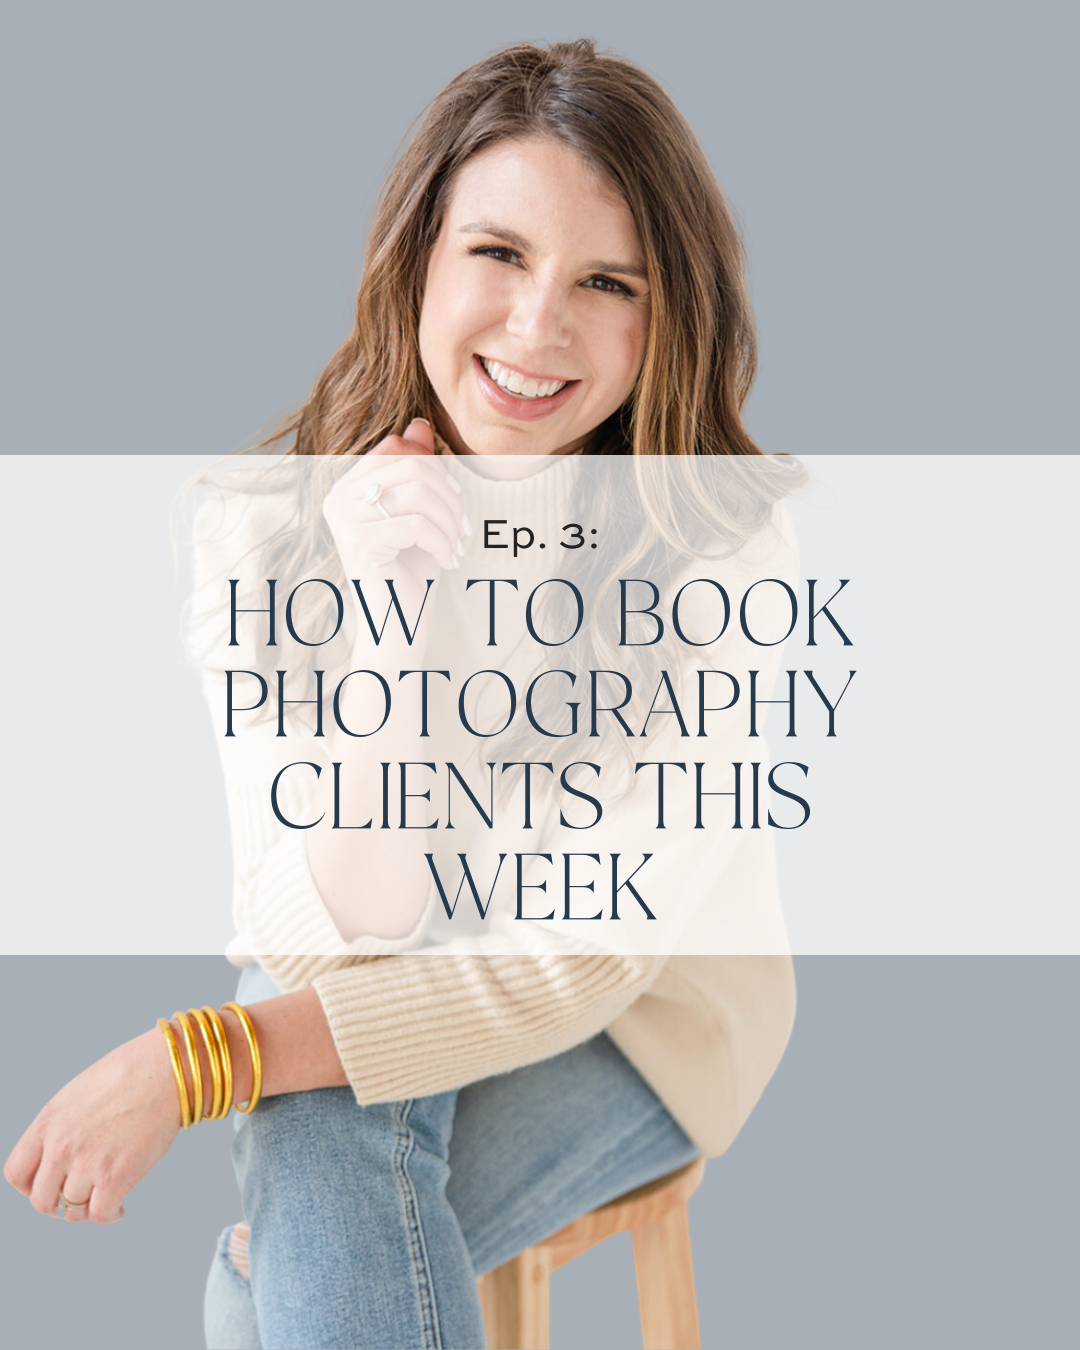 HOW TO BOOK PHOTOGRAPHY CLIENTS THIS WEEK